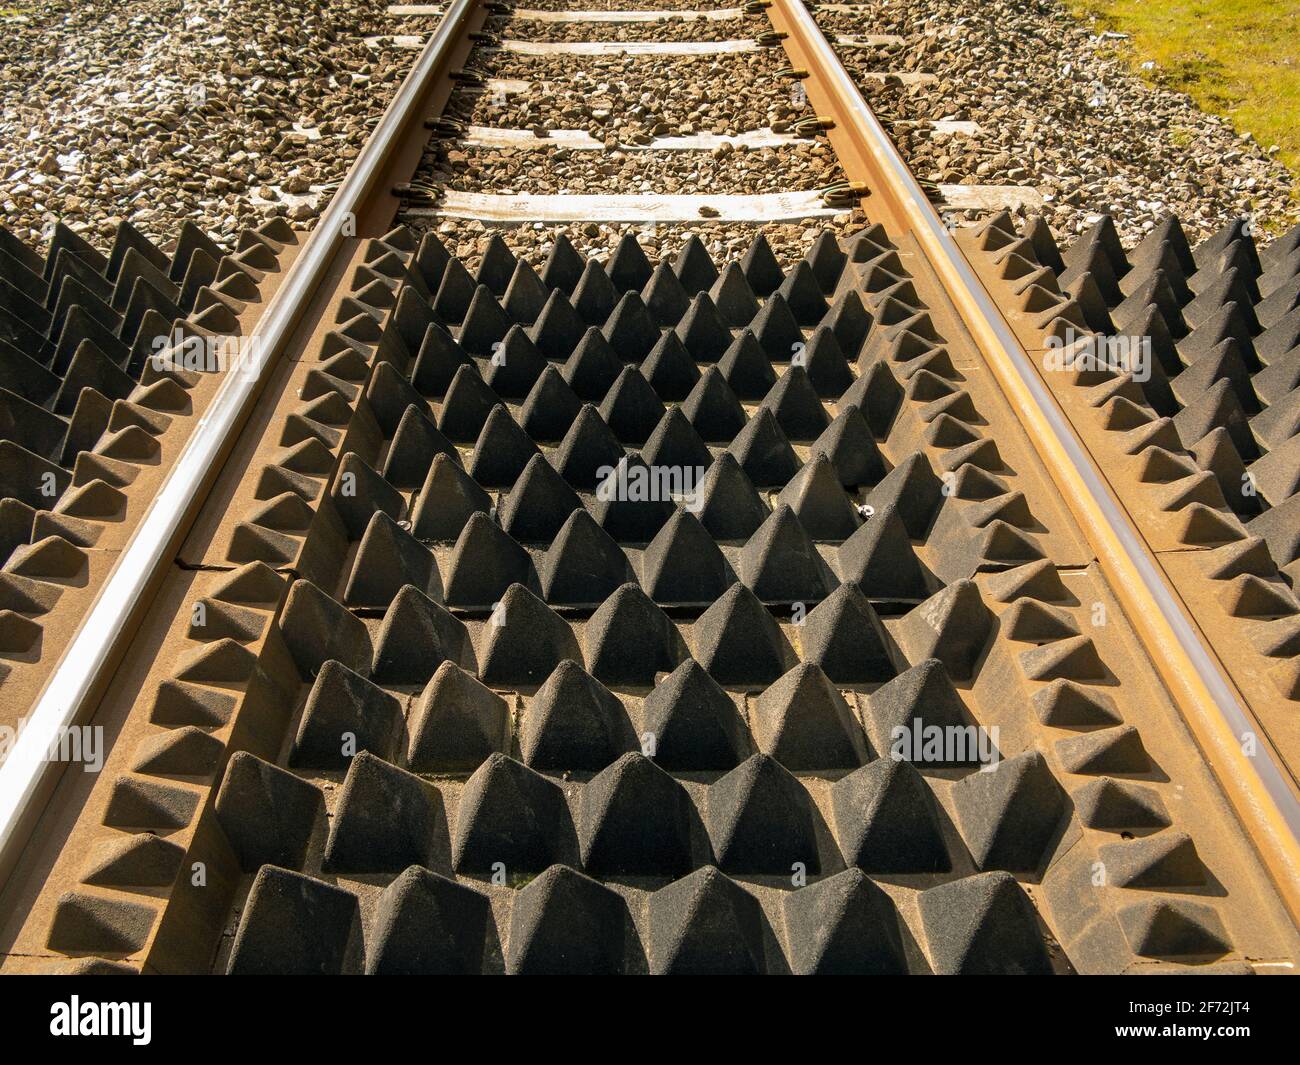 A section of rail track at a footpath crossing showing anti-trespass panels Stock Photo